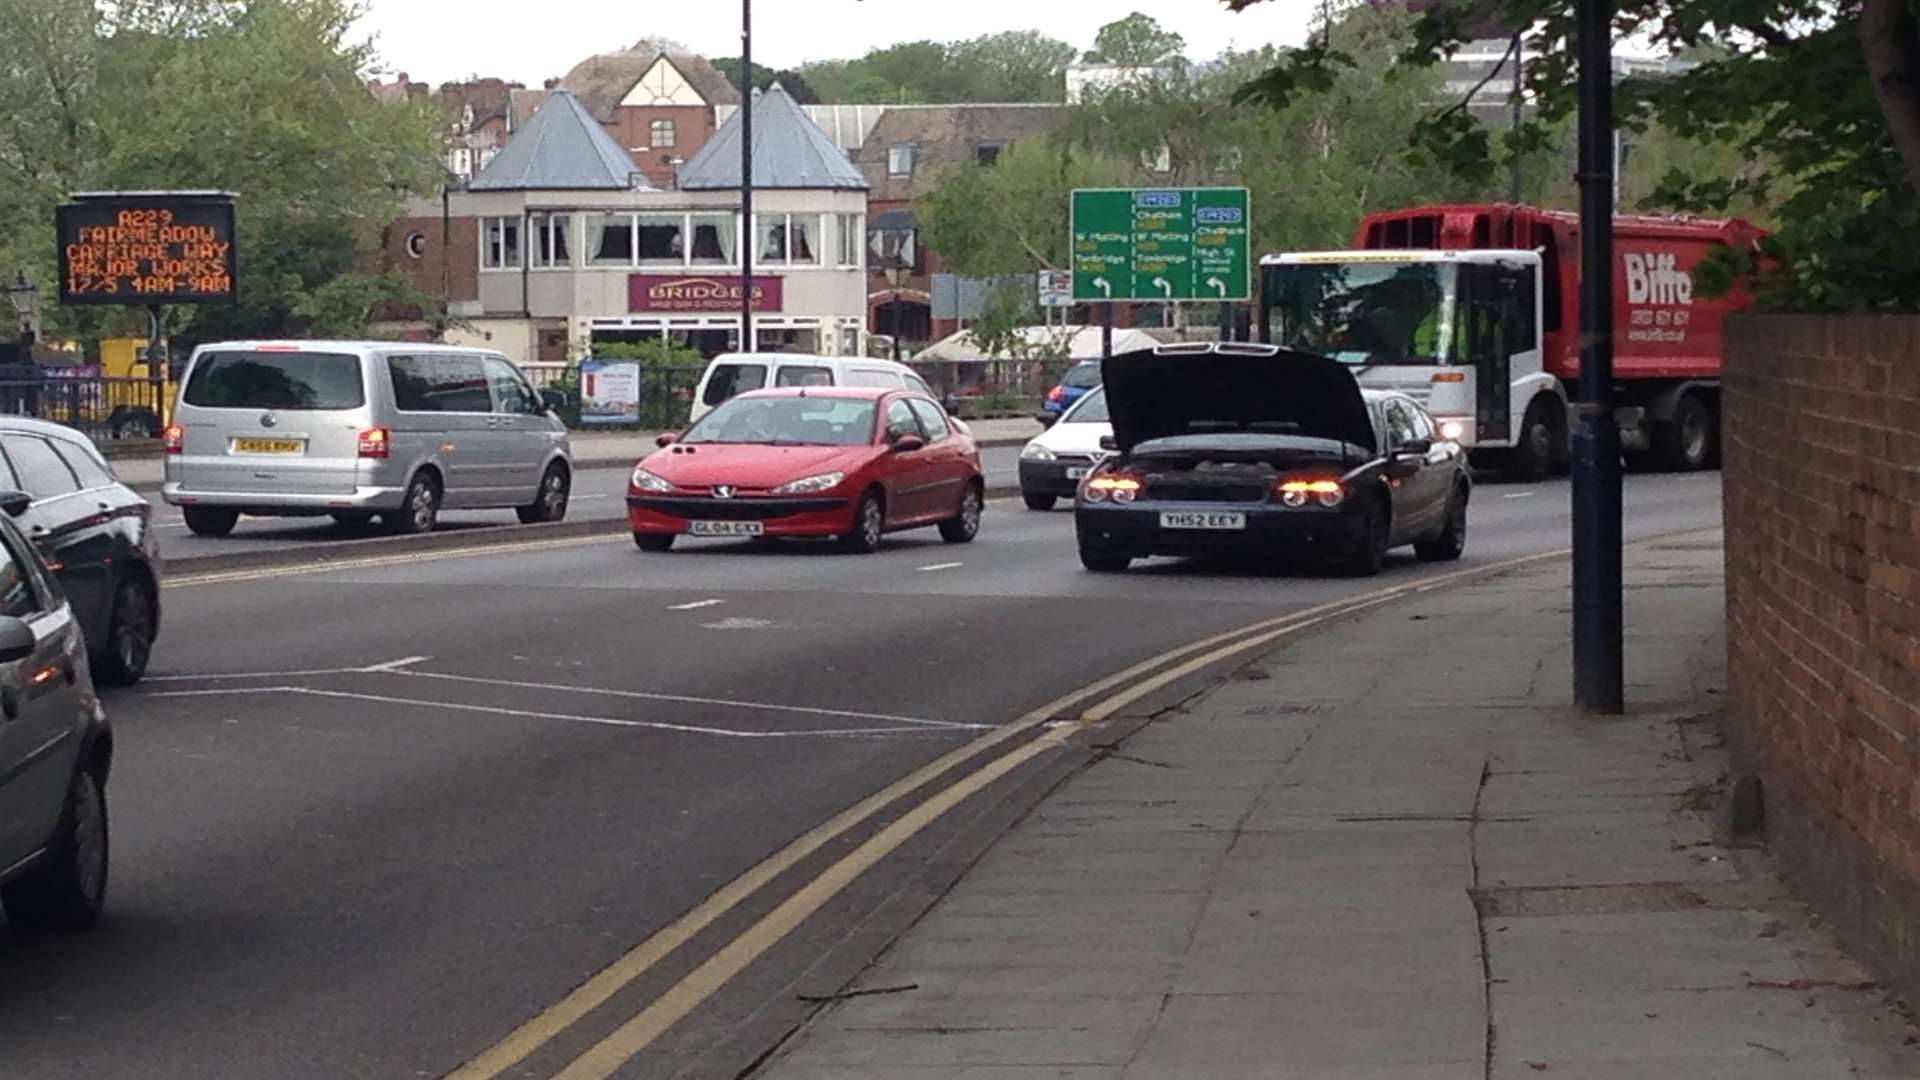 A broken down car is blocking one lane of Maidstone's one-way system.